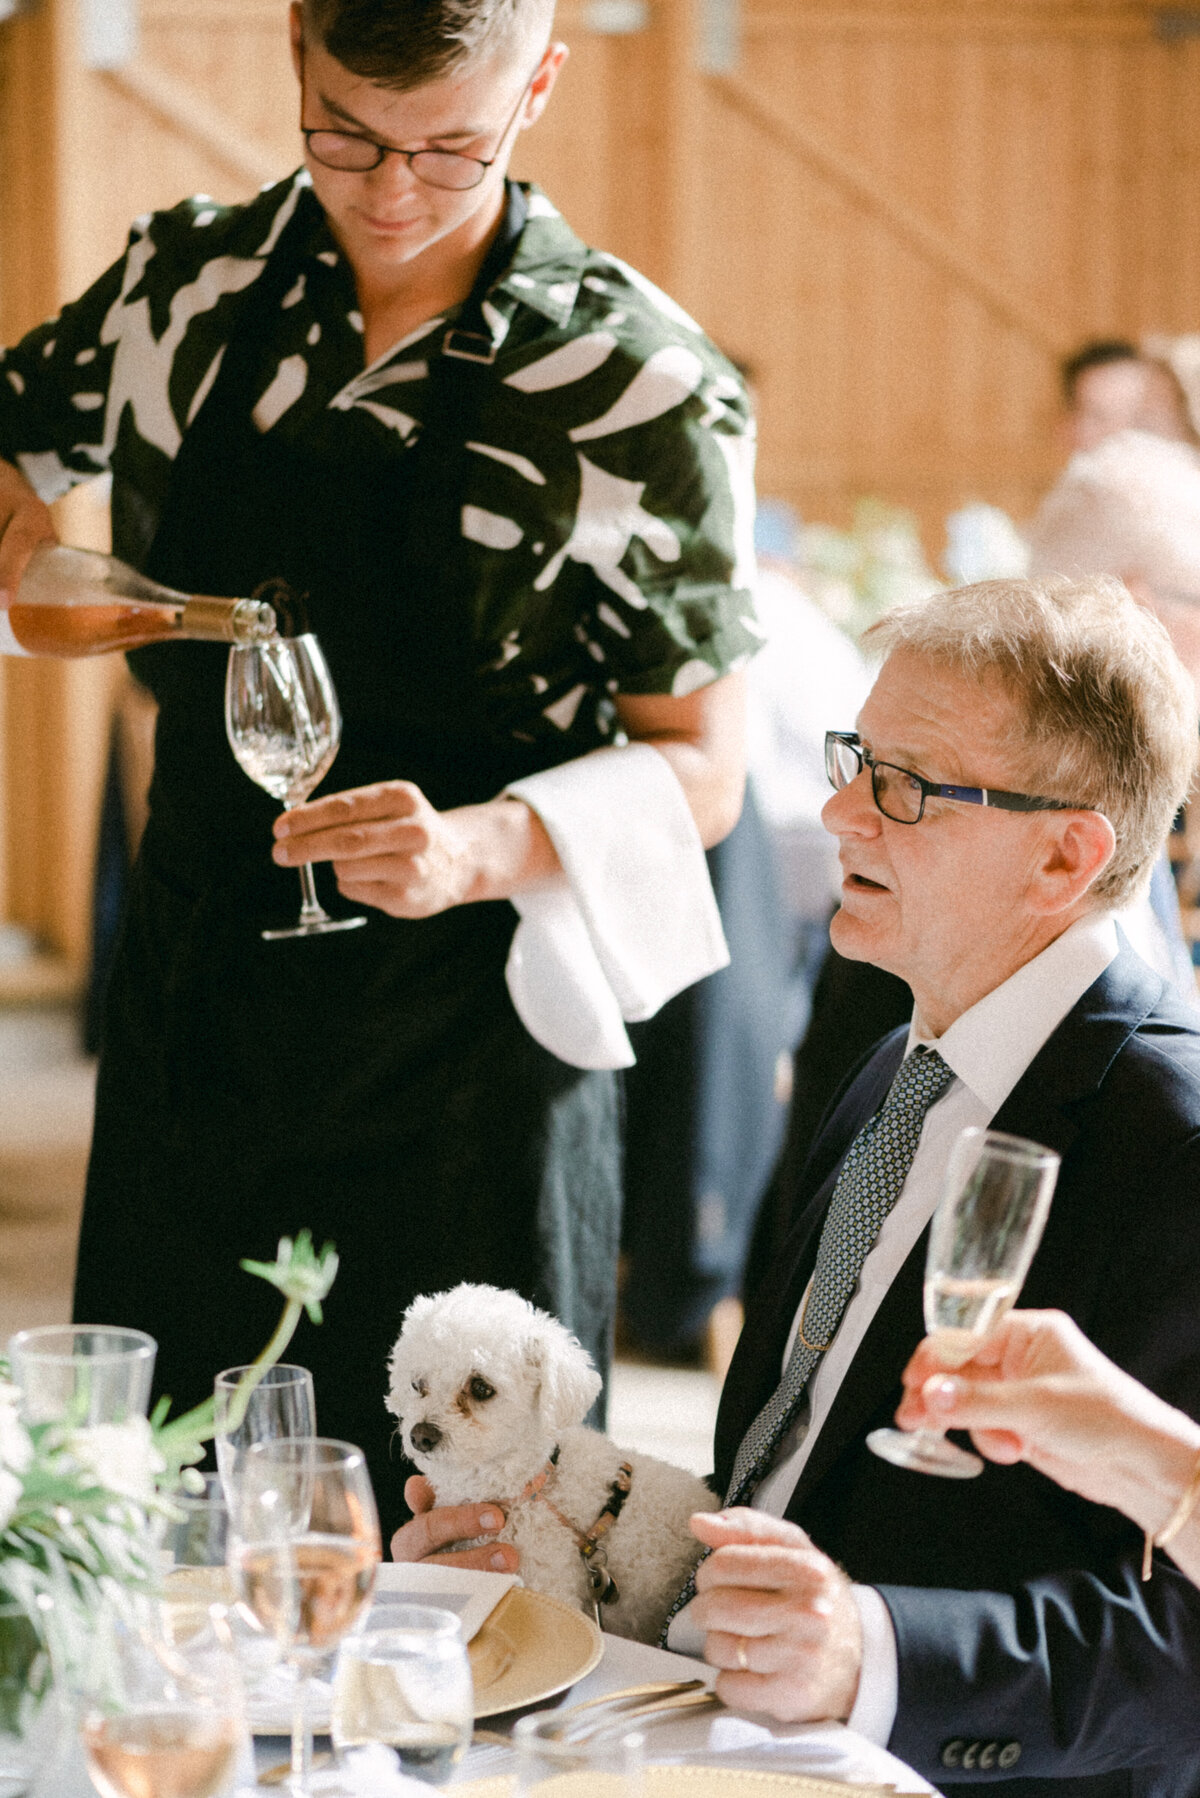 A waiter serving  wine in an image photographed by wedding photographer Hannika Gabrielsson.